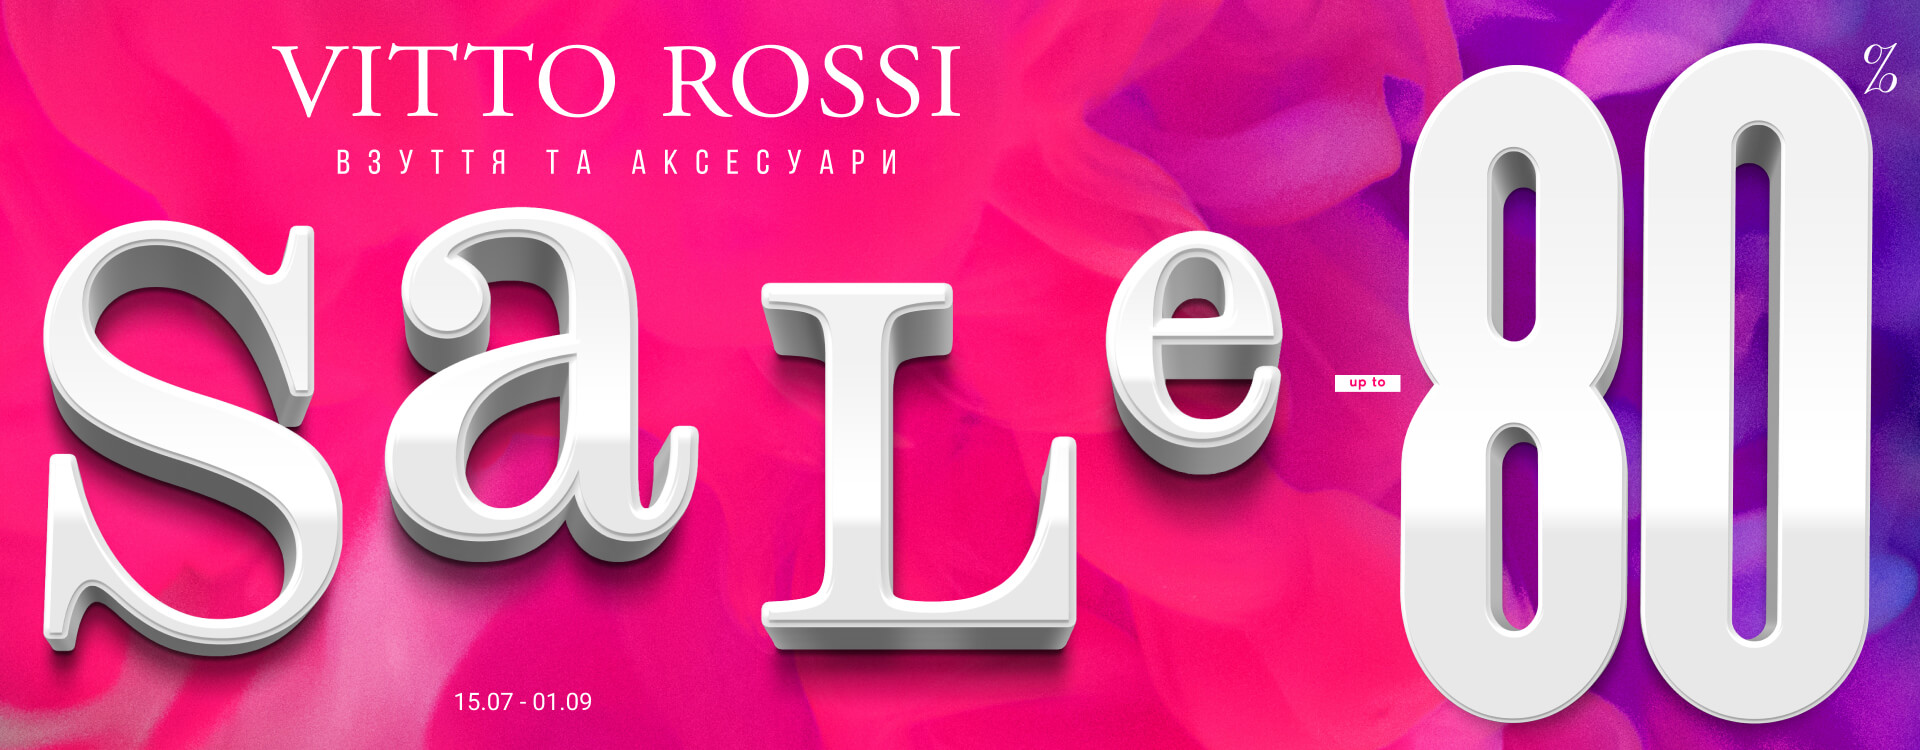 Up to -80% on the SS'23 collection at Vitto Rossi